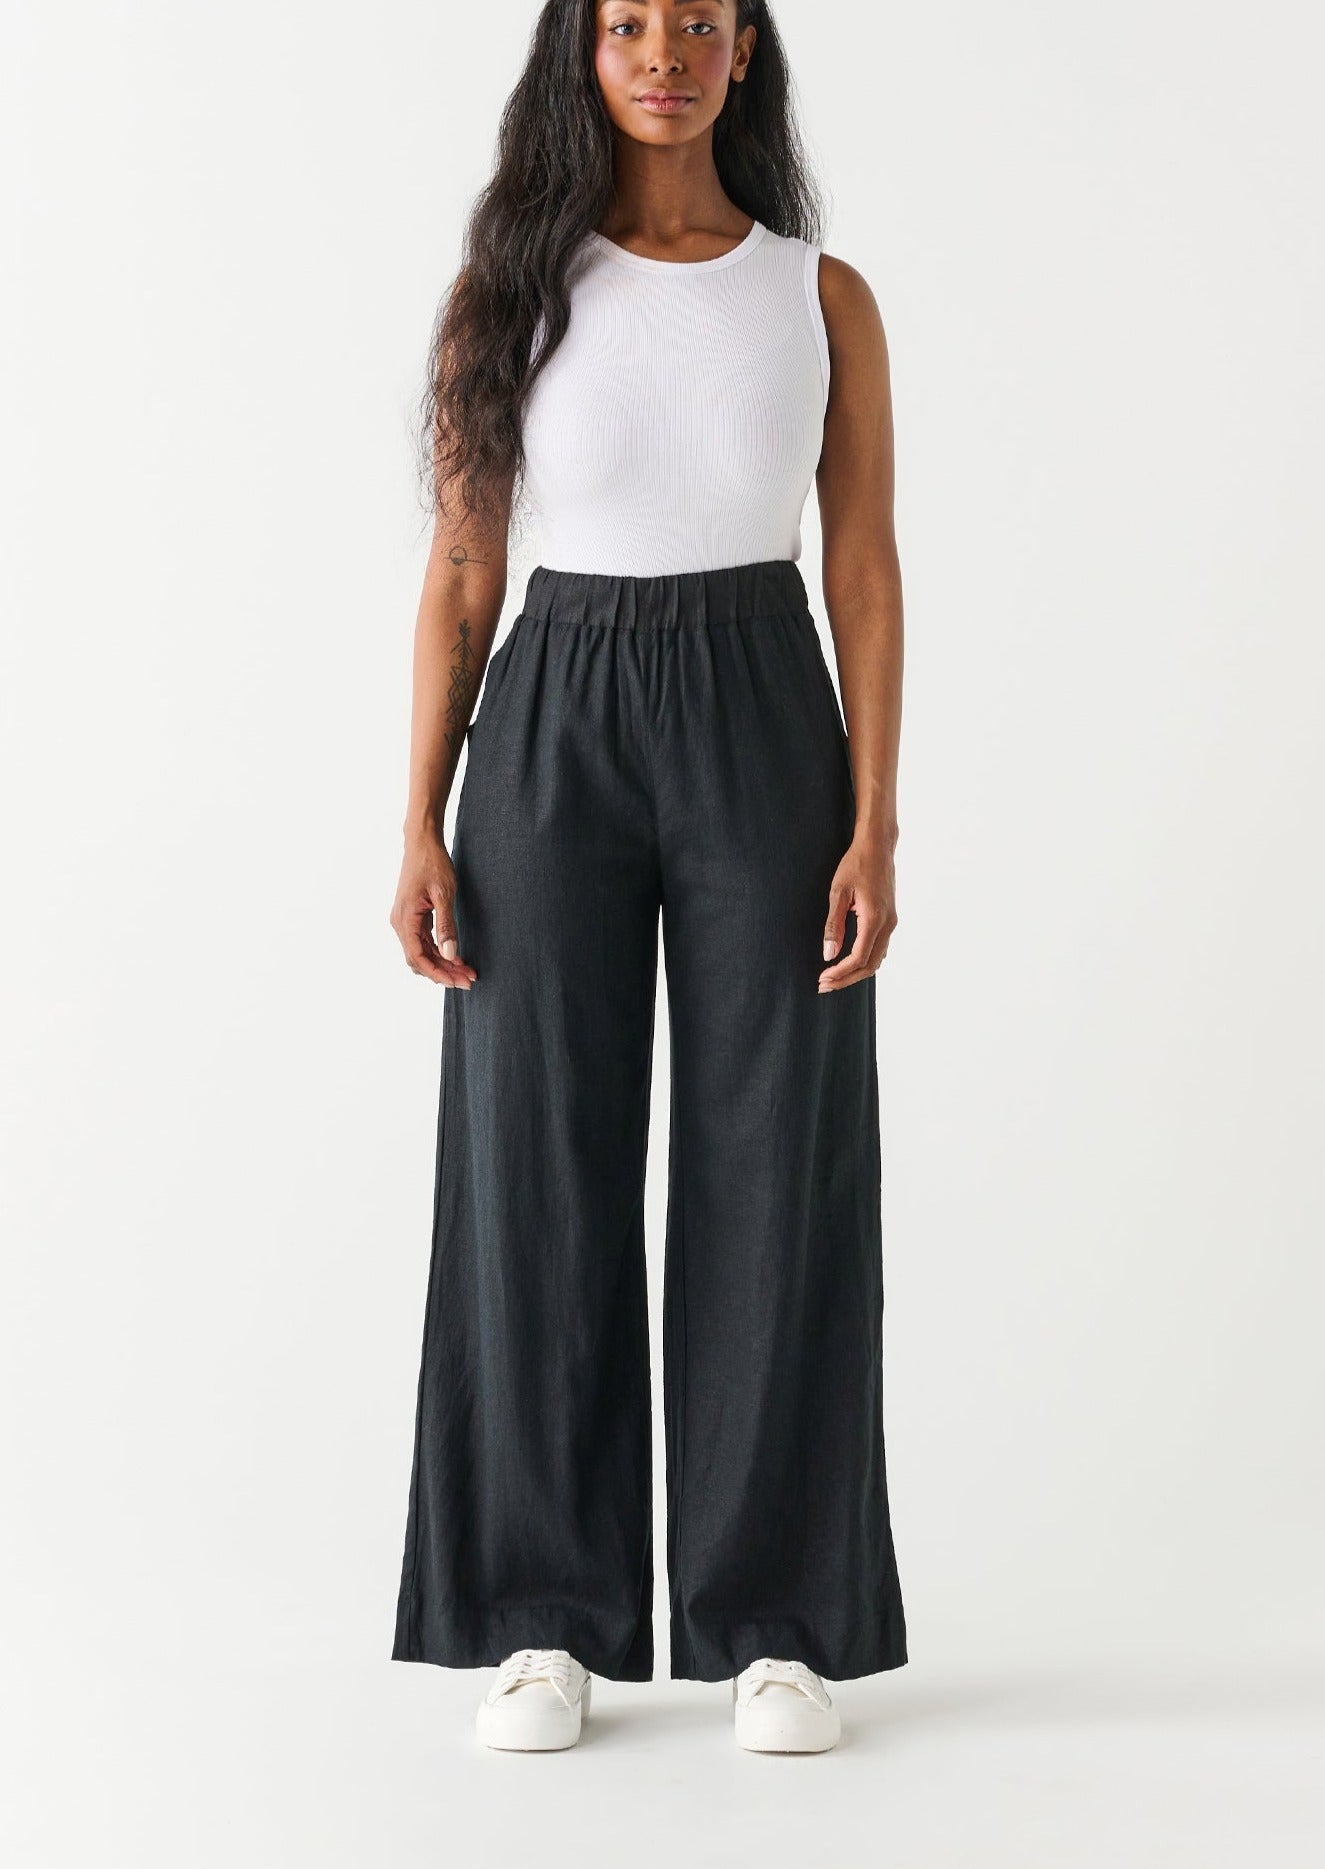 Dex Wide Leg Leather Pants – BK's Brand Name Clothing